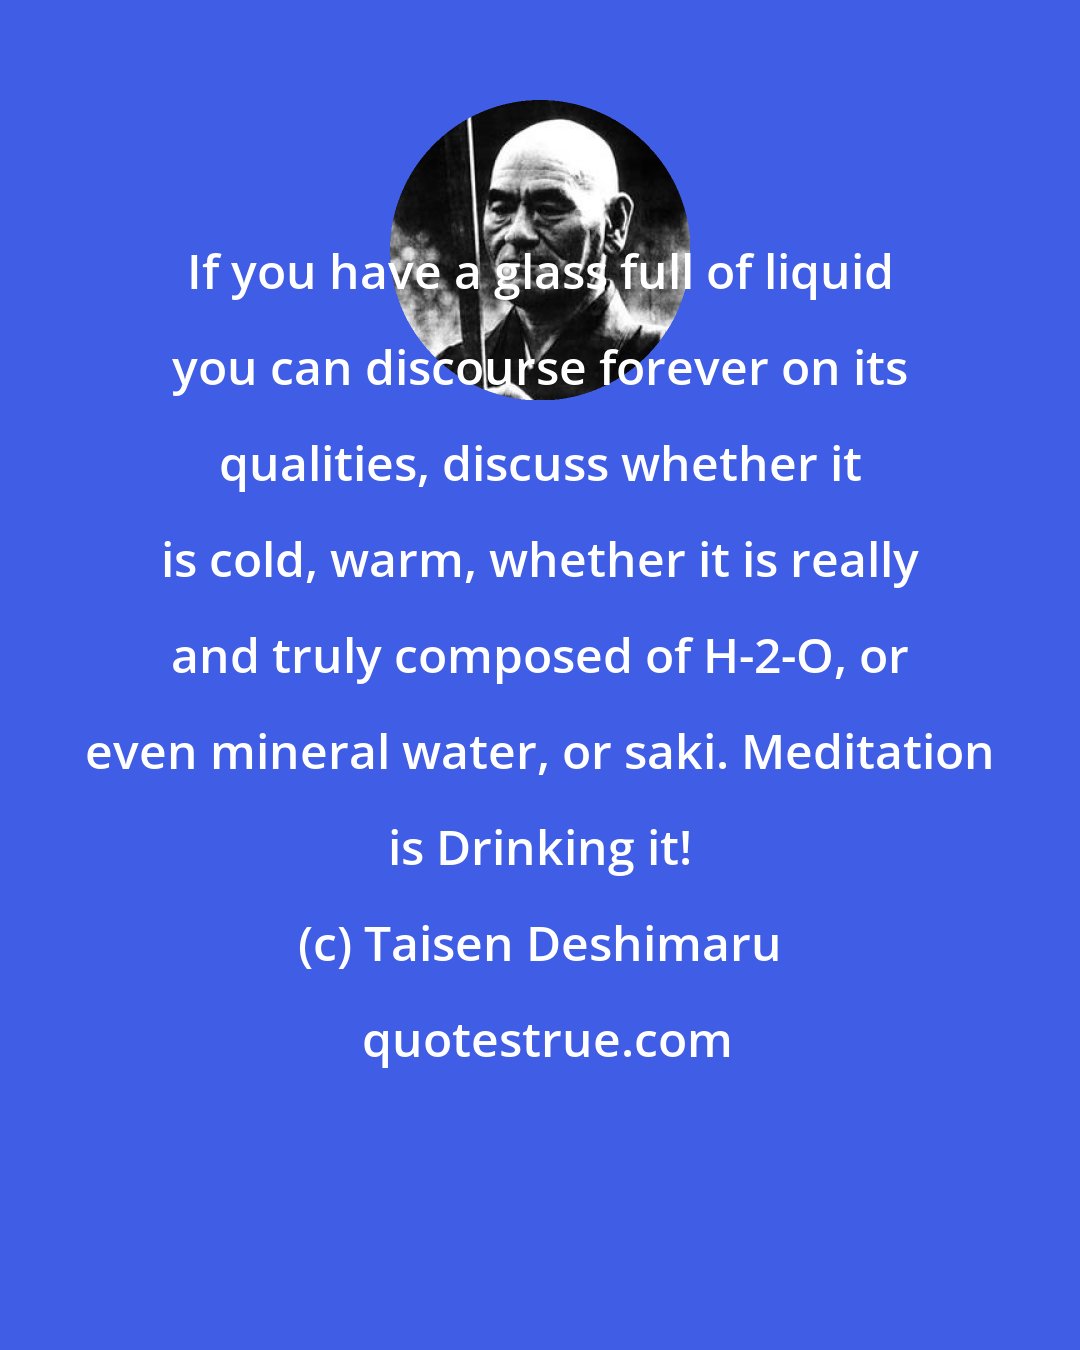 Taisen Deshimaru: If you have a glass full of liquid you can discourse forever on its qualities, discuss whether it is cold, warm, whether it is really and truly composed of H-2-O, or even mineral water, or saki. Meditation is Drinking it!